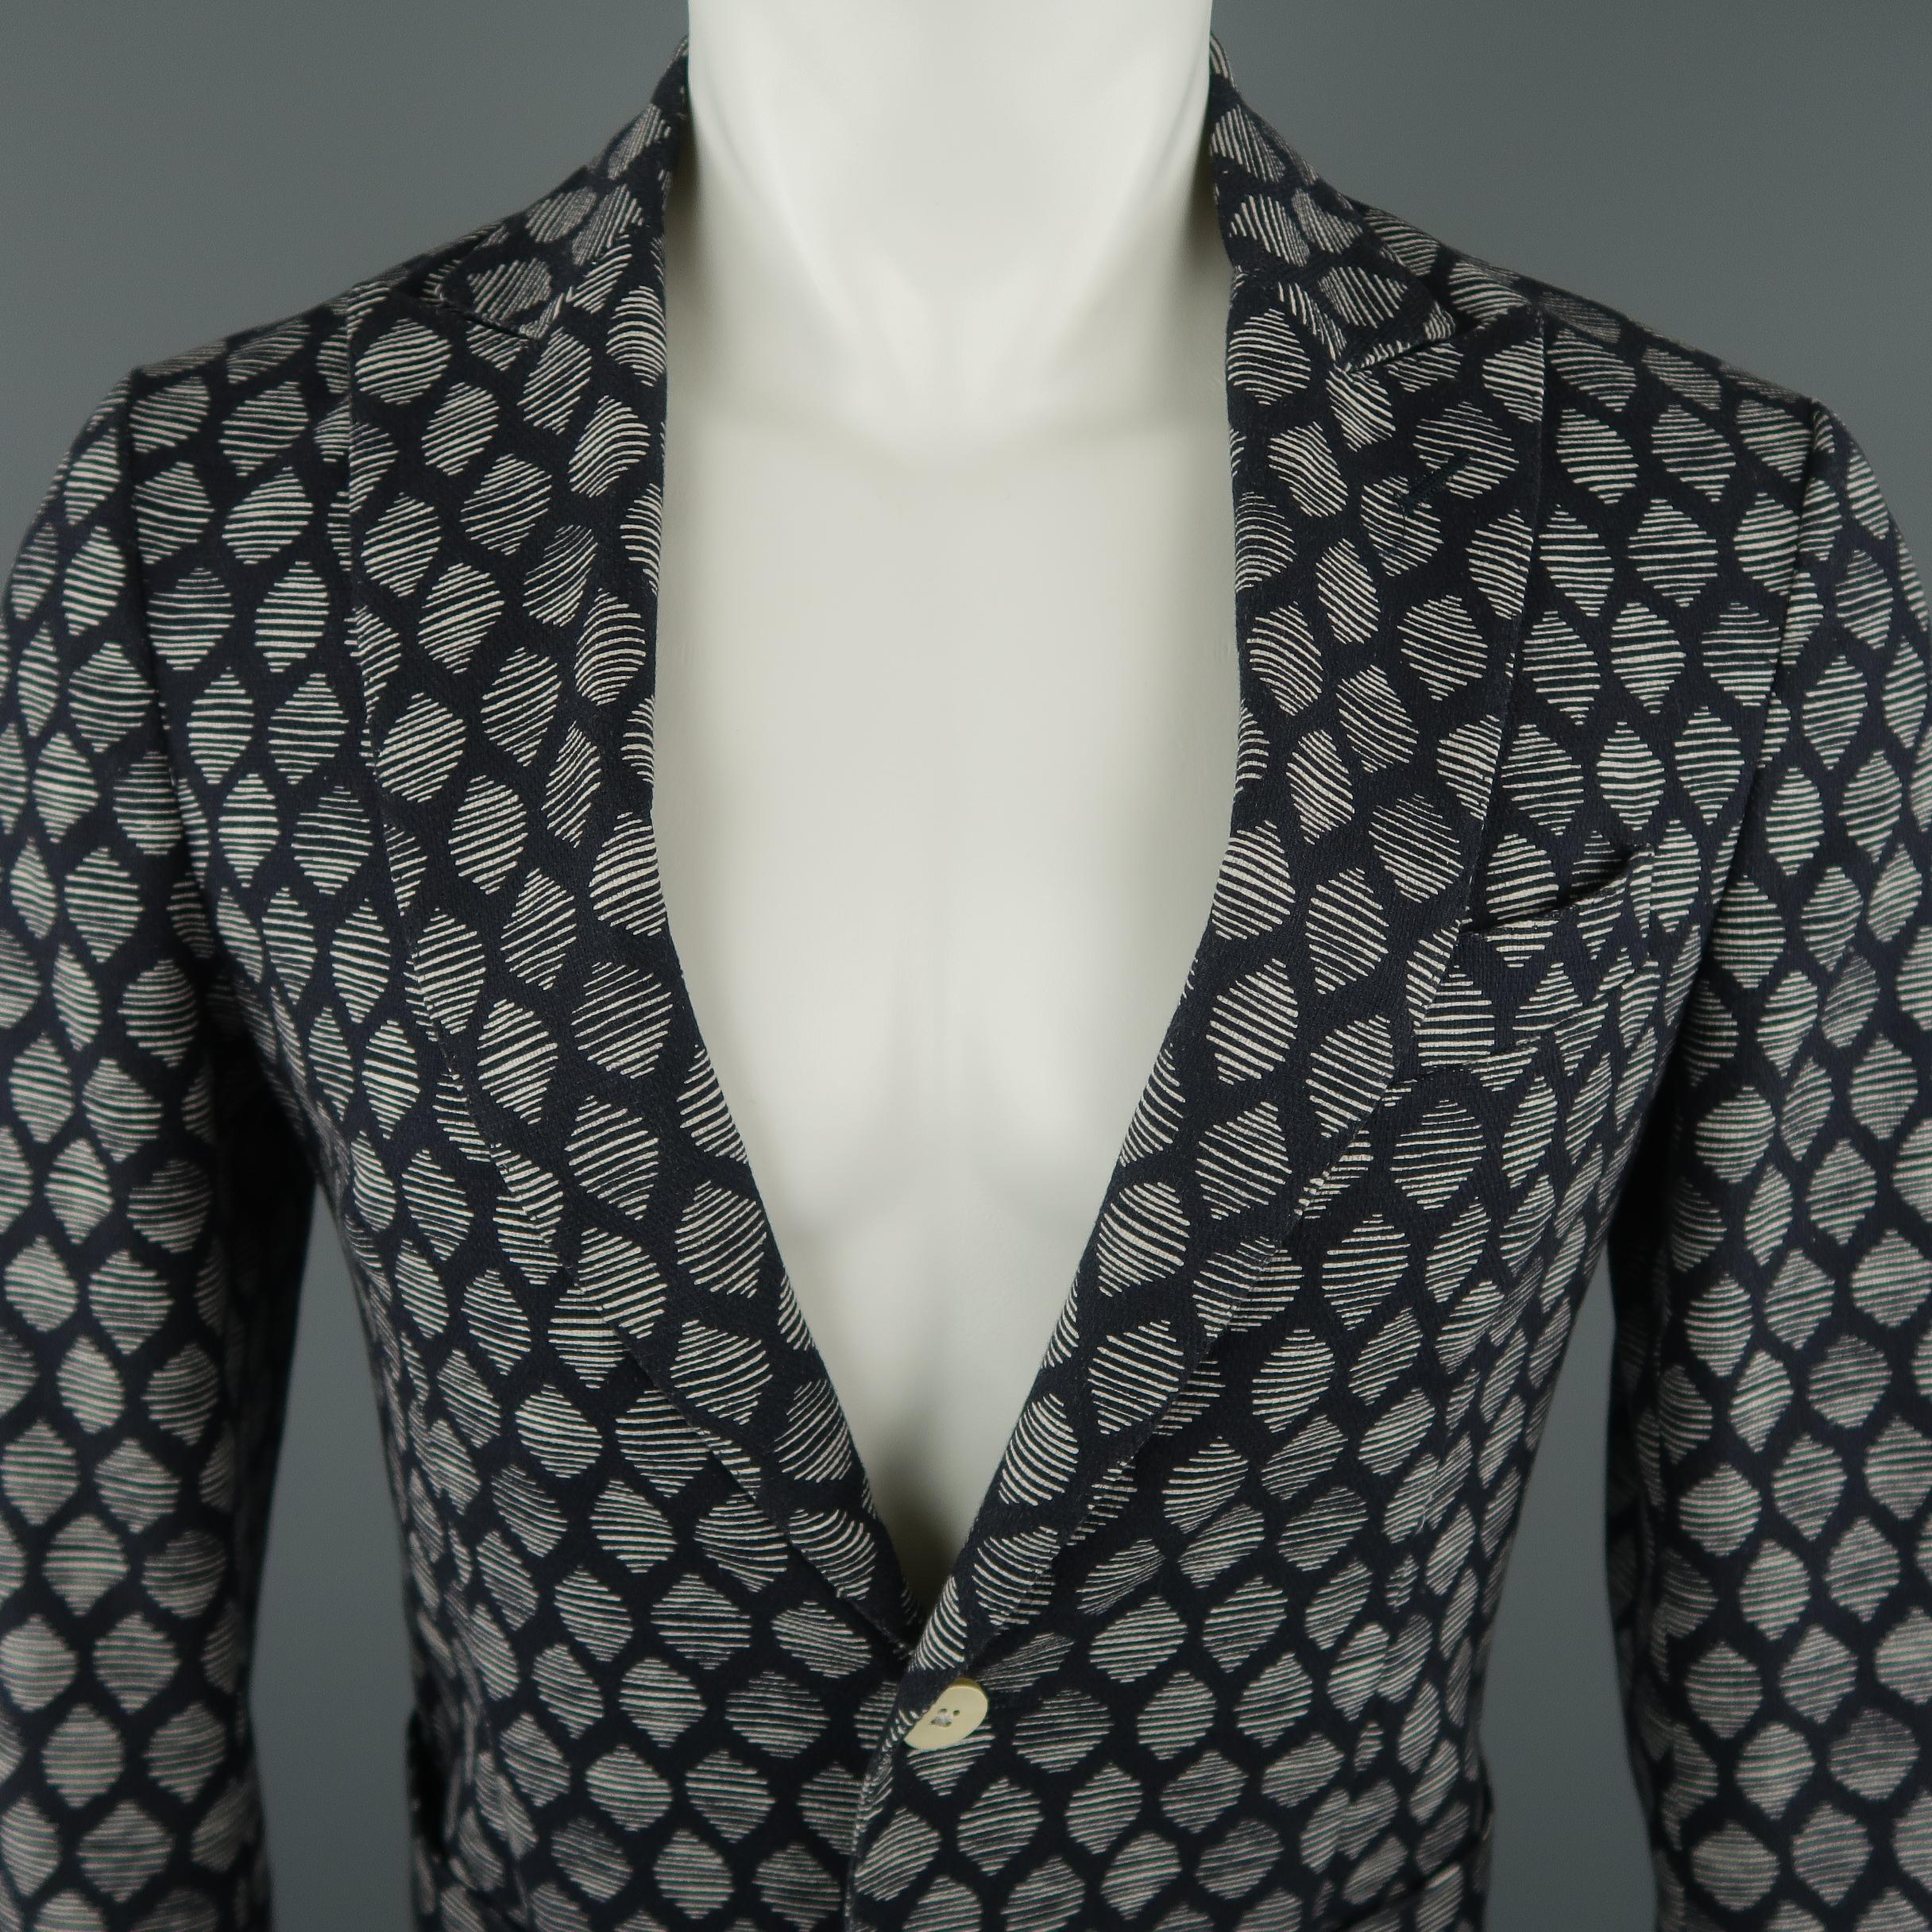 MESSAGERIE short blazer comes in black and grey tones in a printed cotton blend material, featuring a peak lapel, slit and patch pockets, in a slim fit. Made in Italy.
 
Excellent Pre-Owned Condition.
Marked: 46 IT
 
Measurements:
 
Shoulder: 16.5